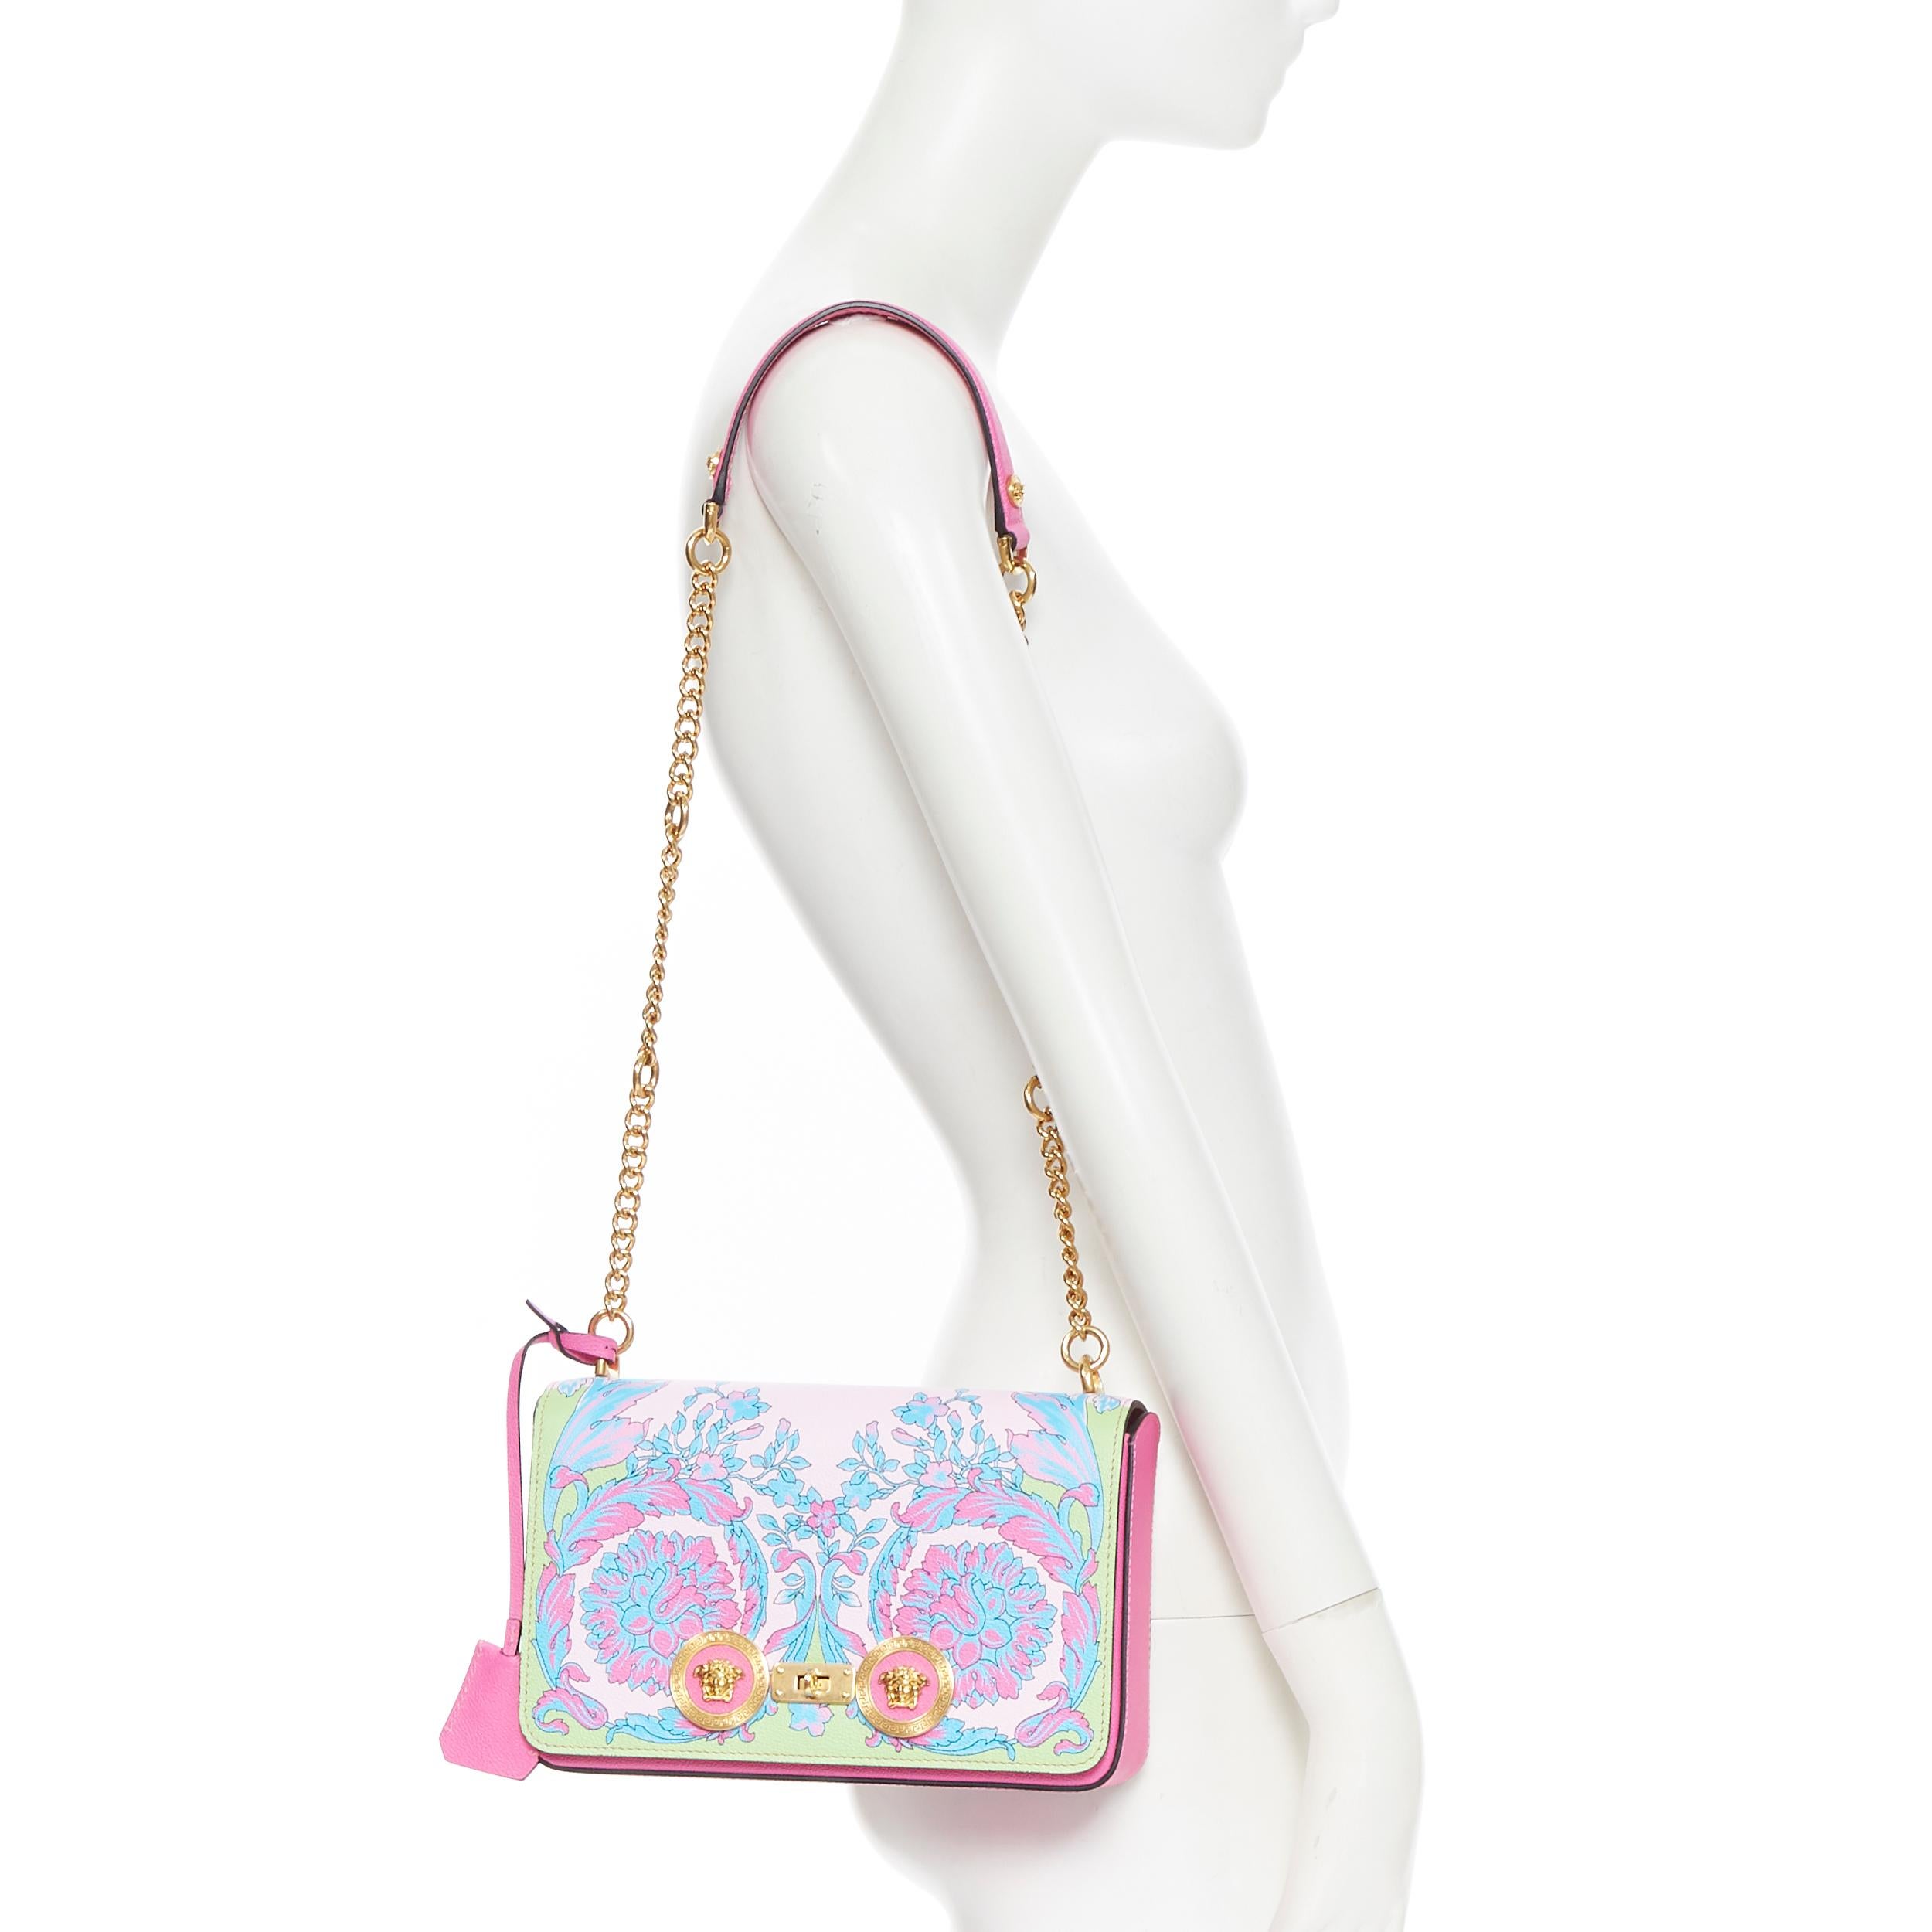 new VERSACE Medium Icon SS19 Runway Technicolor Baroque gold chain shoulder bag
Brand: Versace
Designer: Donatella Versace
Collection: SS19
Model Name / Style: Medium Icon
Material: Leather
Color: Pink
Pattern: Floral
Closure: Turnlock
Lining